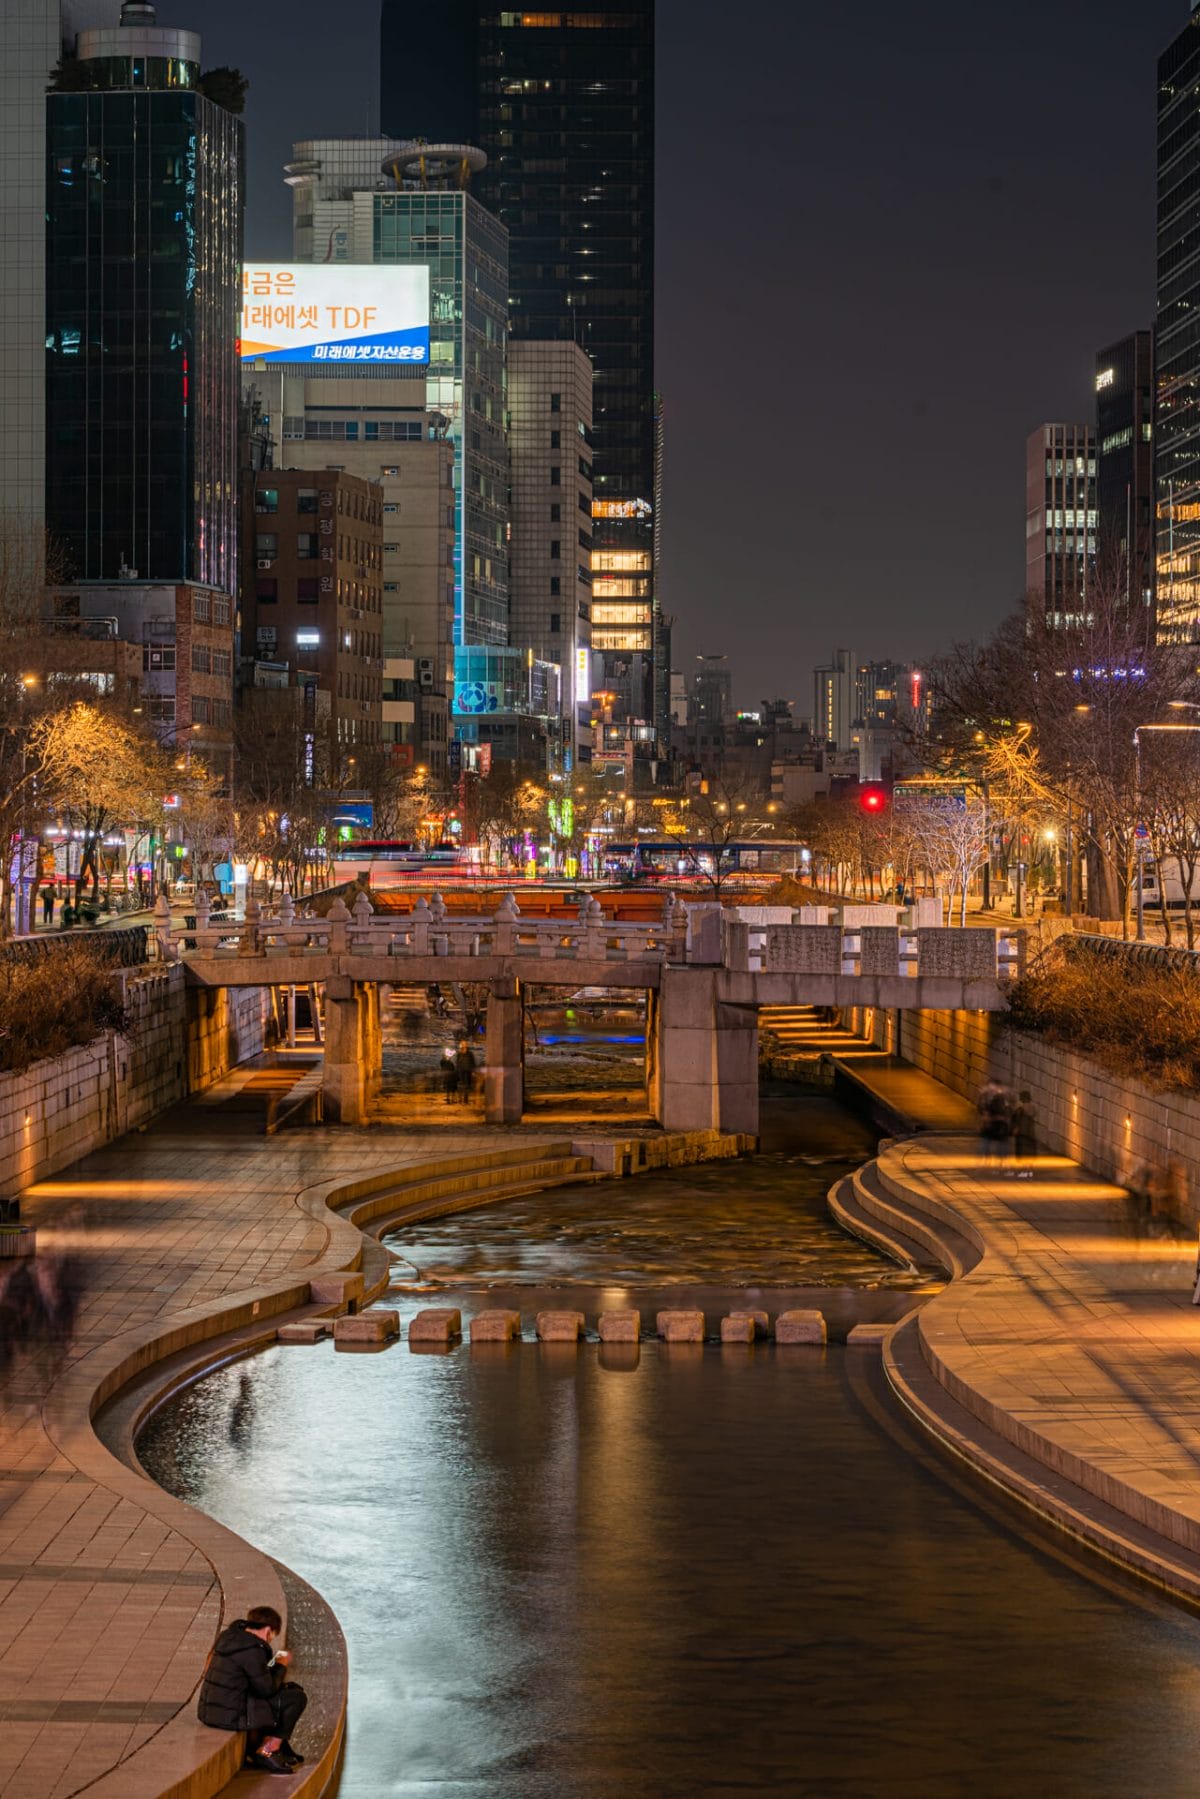 Seoul at Night - Best Views, Activities, Areas and More 19